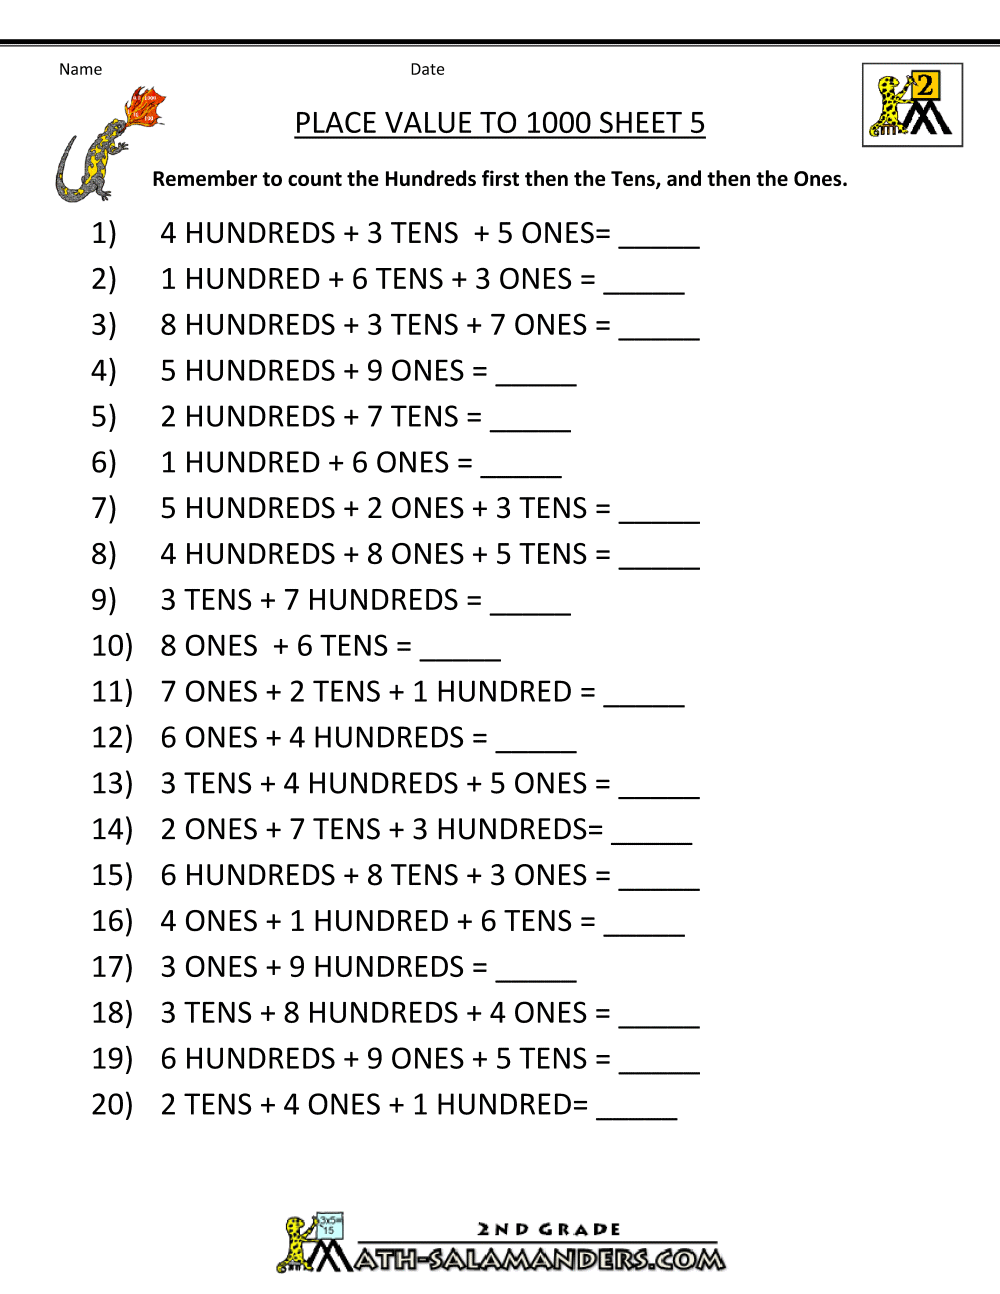 grade-5-place-value-rounding-worksheets-free-printable-k5-learning